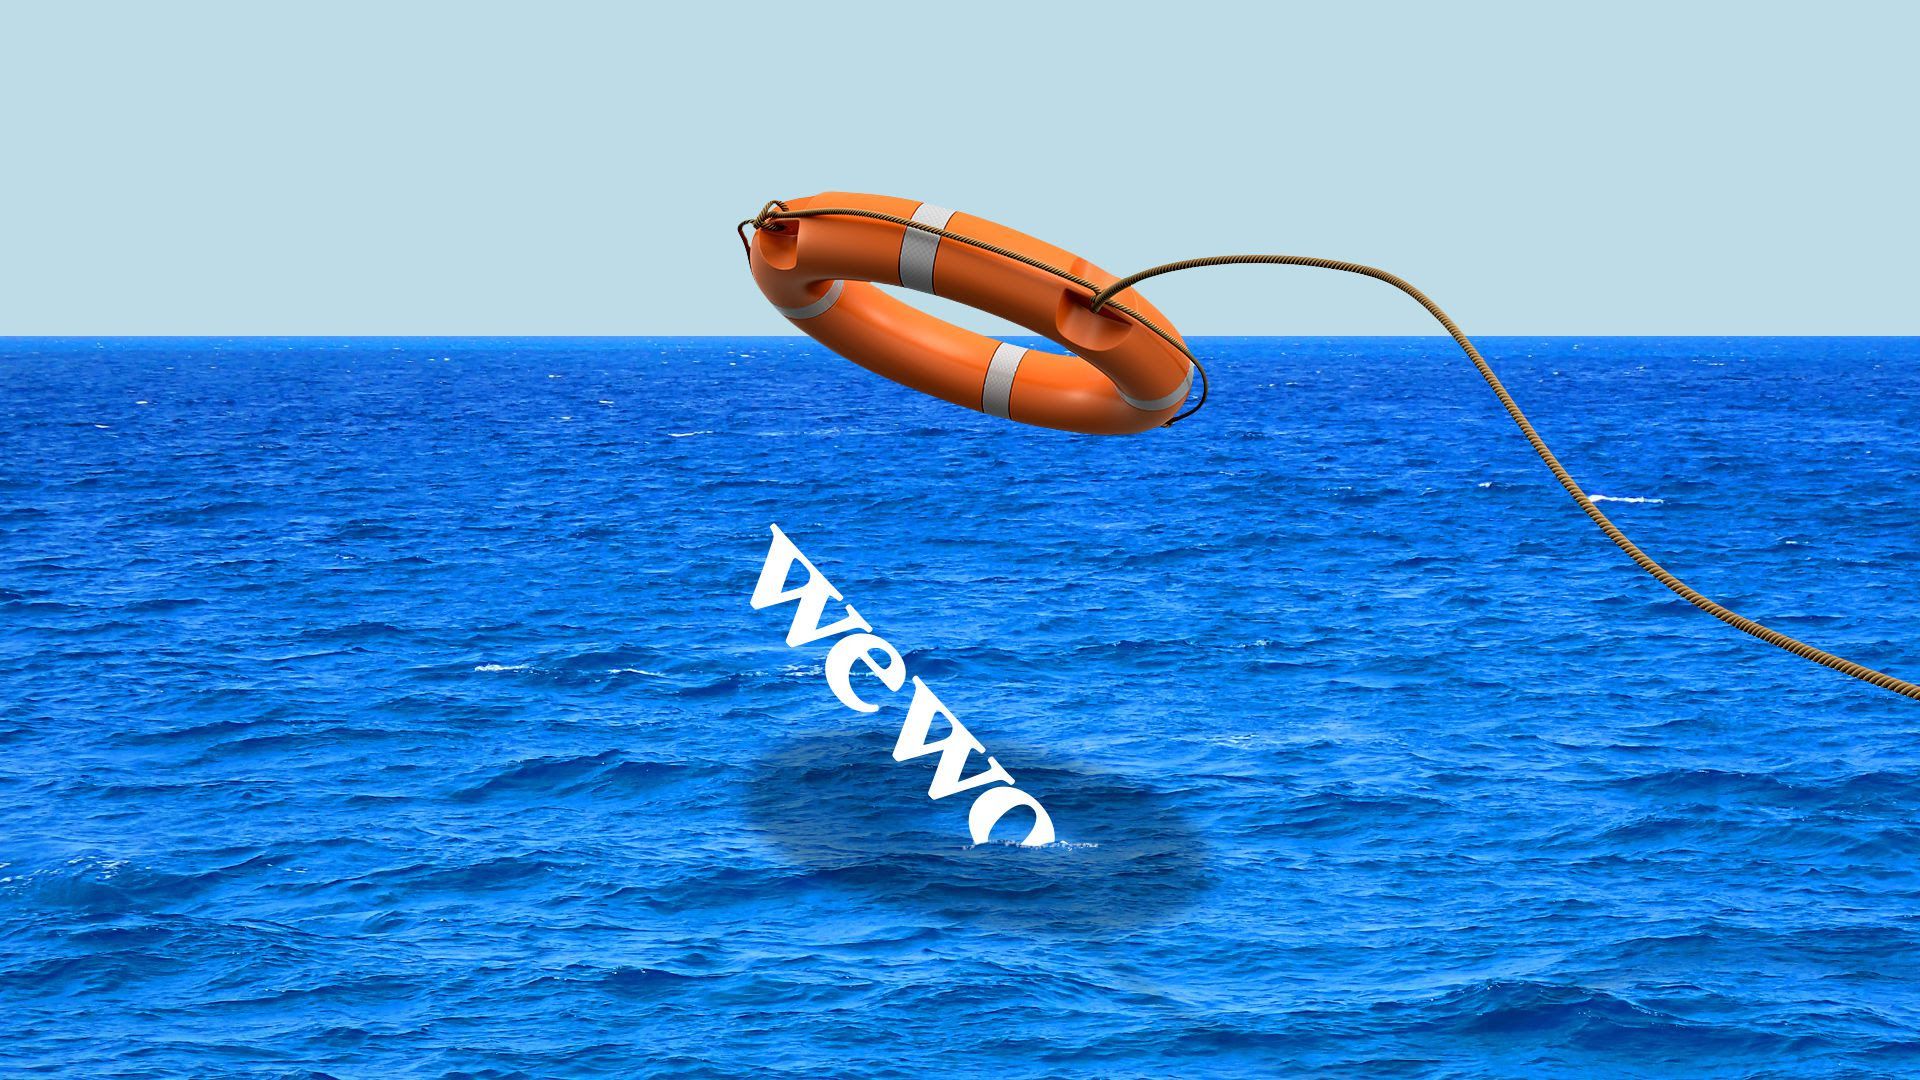 Illustration of a life raft being tossed to the WeWork logo in the ocean